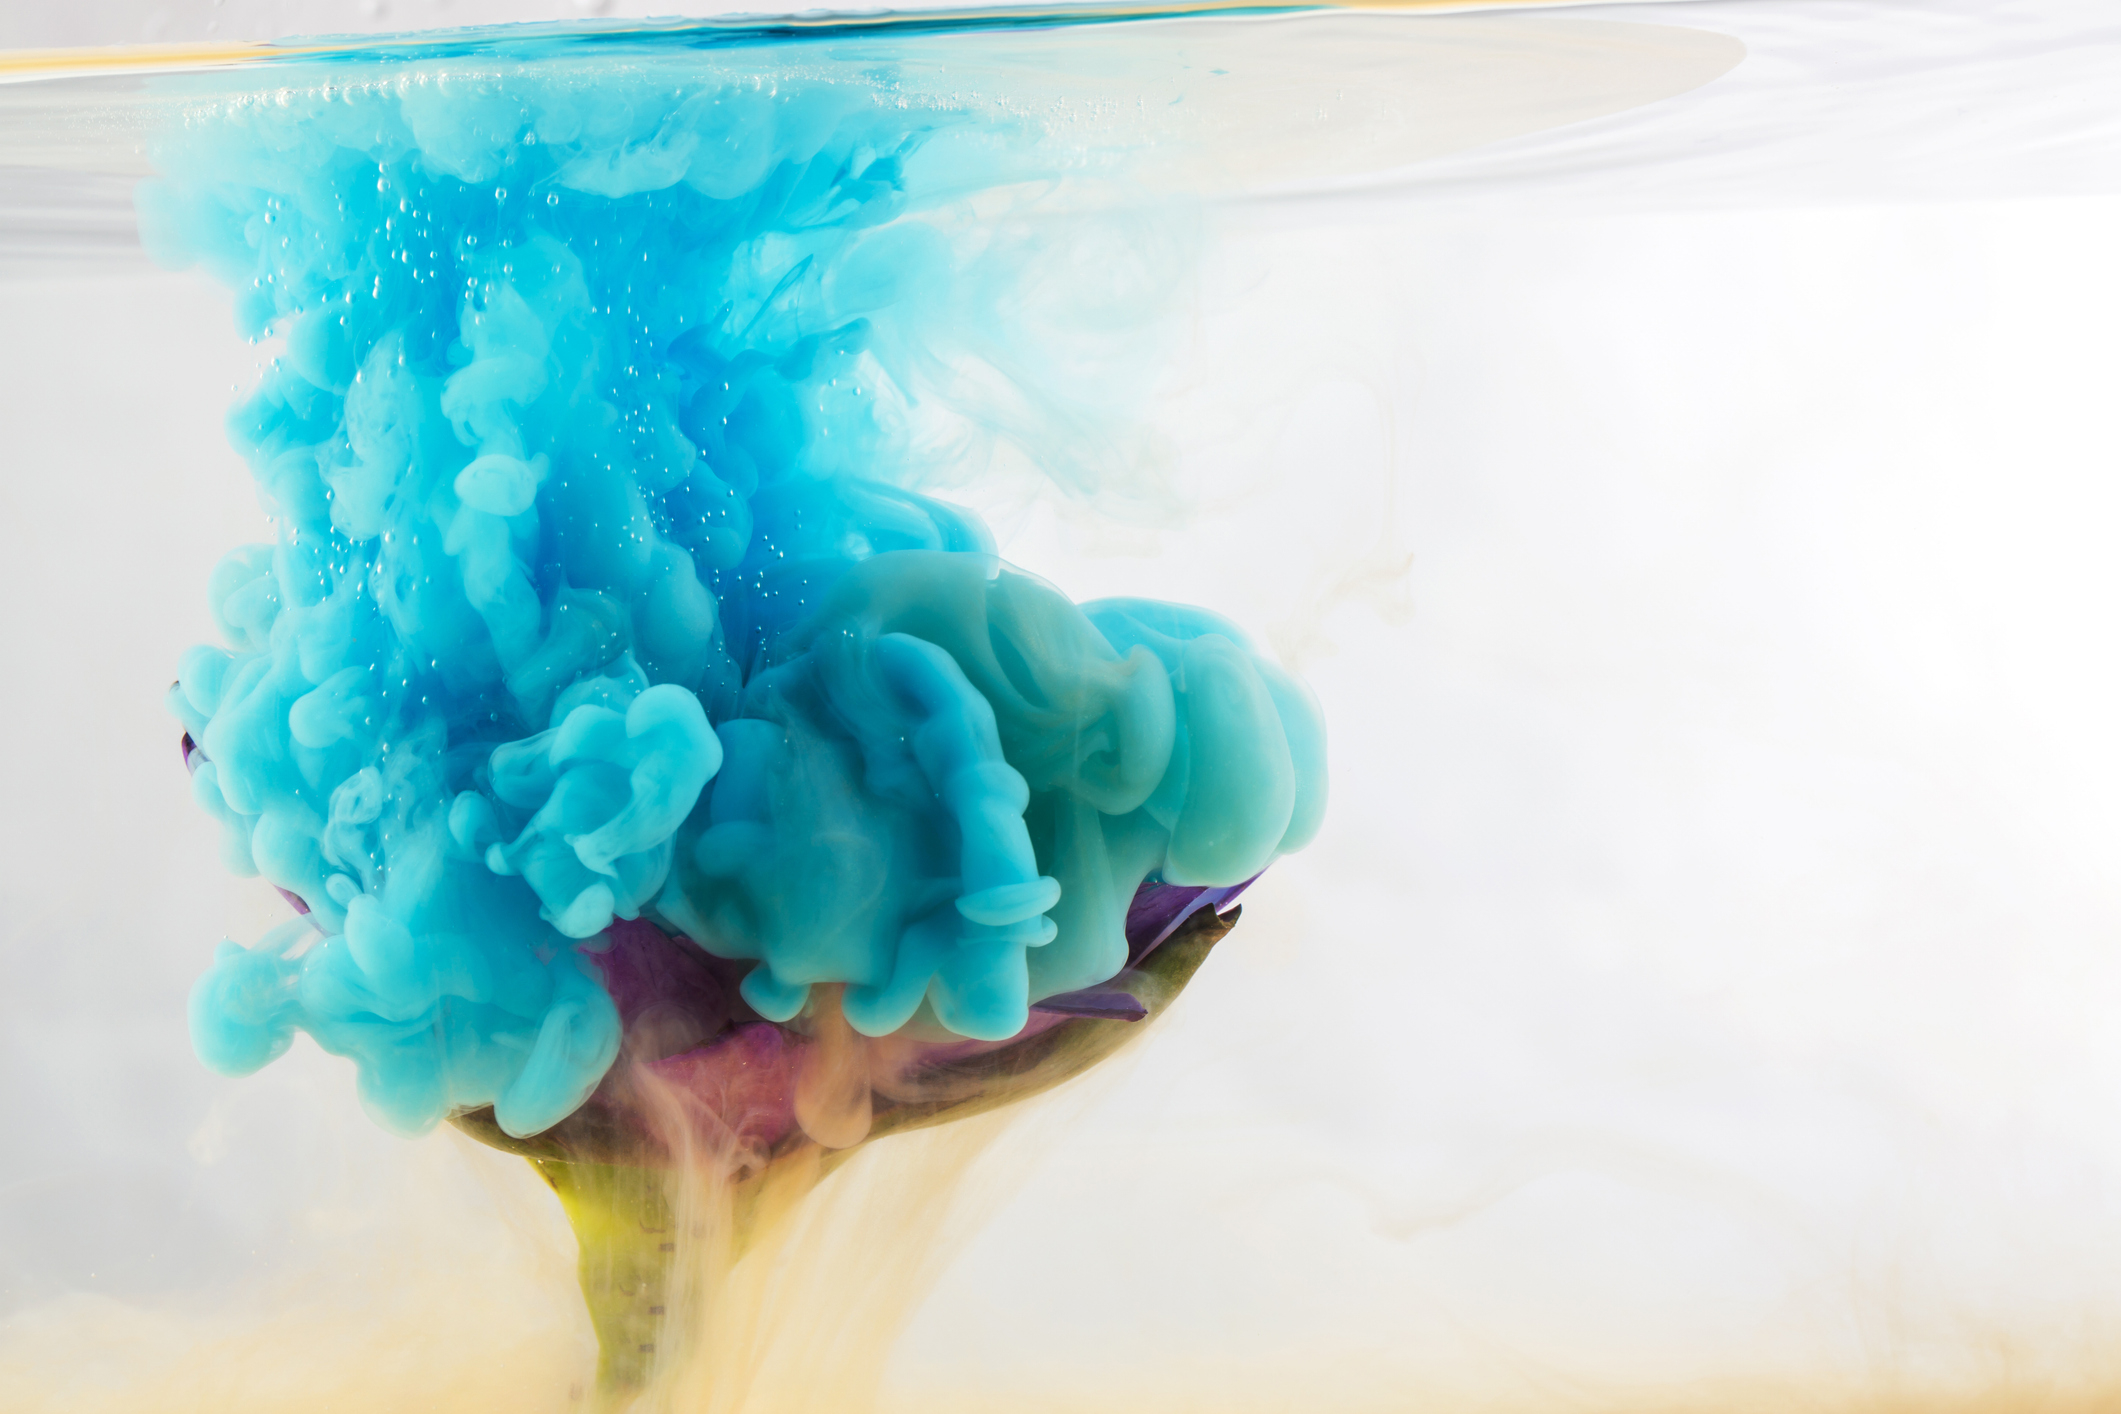 A flower underwater is partially visible as vibrant blue dye clouds around it, creating an artistic and ethereal effect